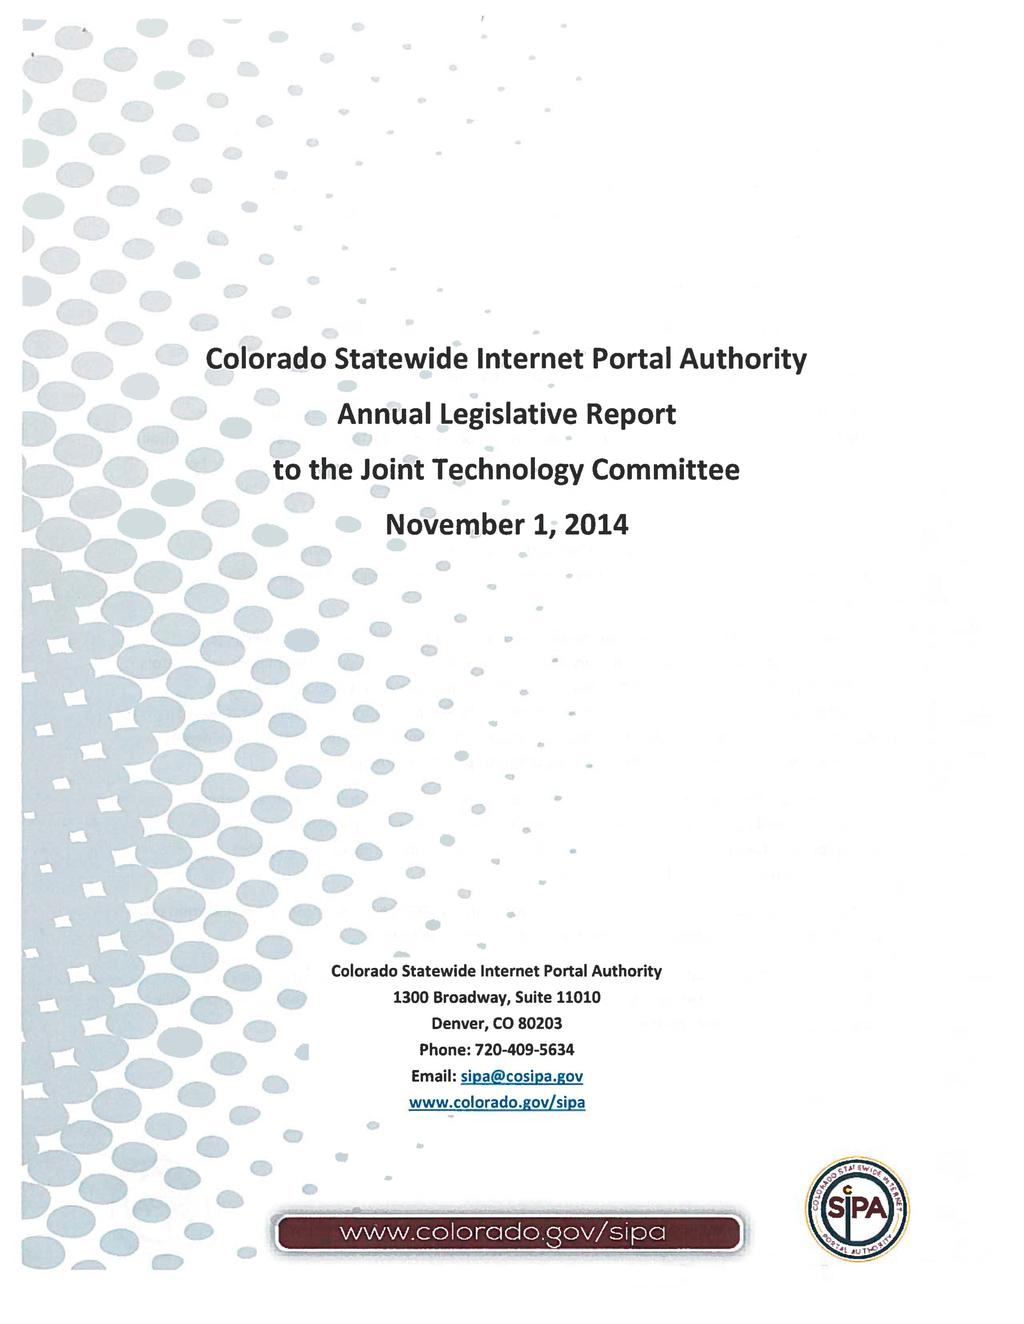 Colorado Statewide Internet Portal Authority Annual Legislative Report to the Joint Technology Committee November 1, 2014